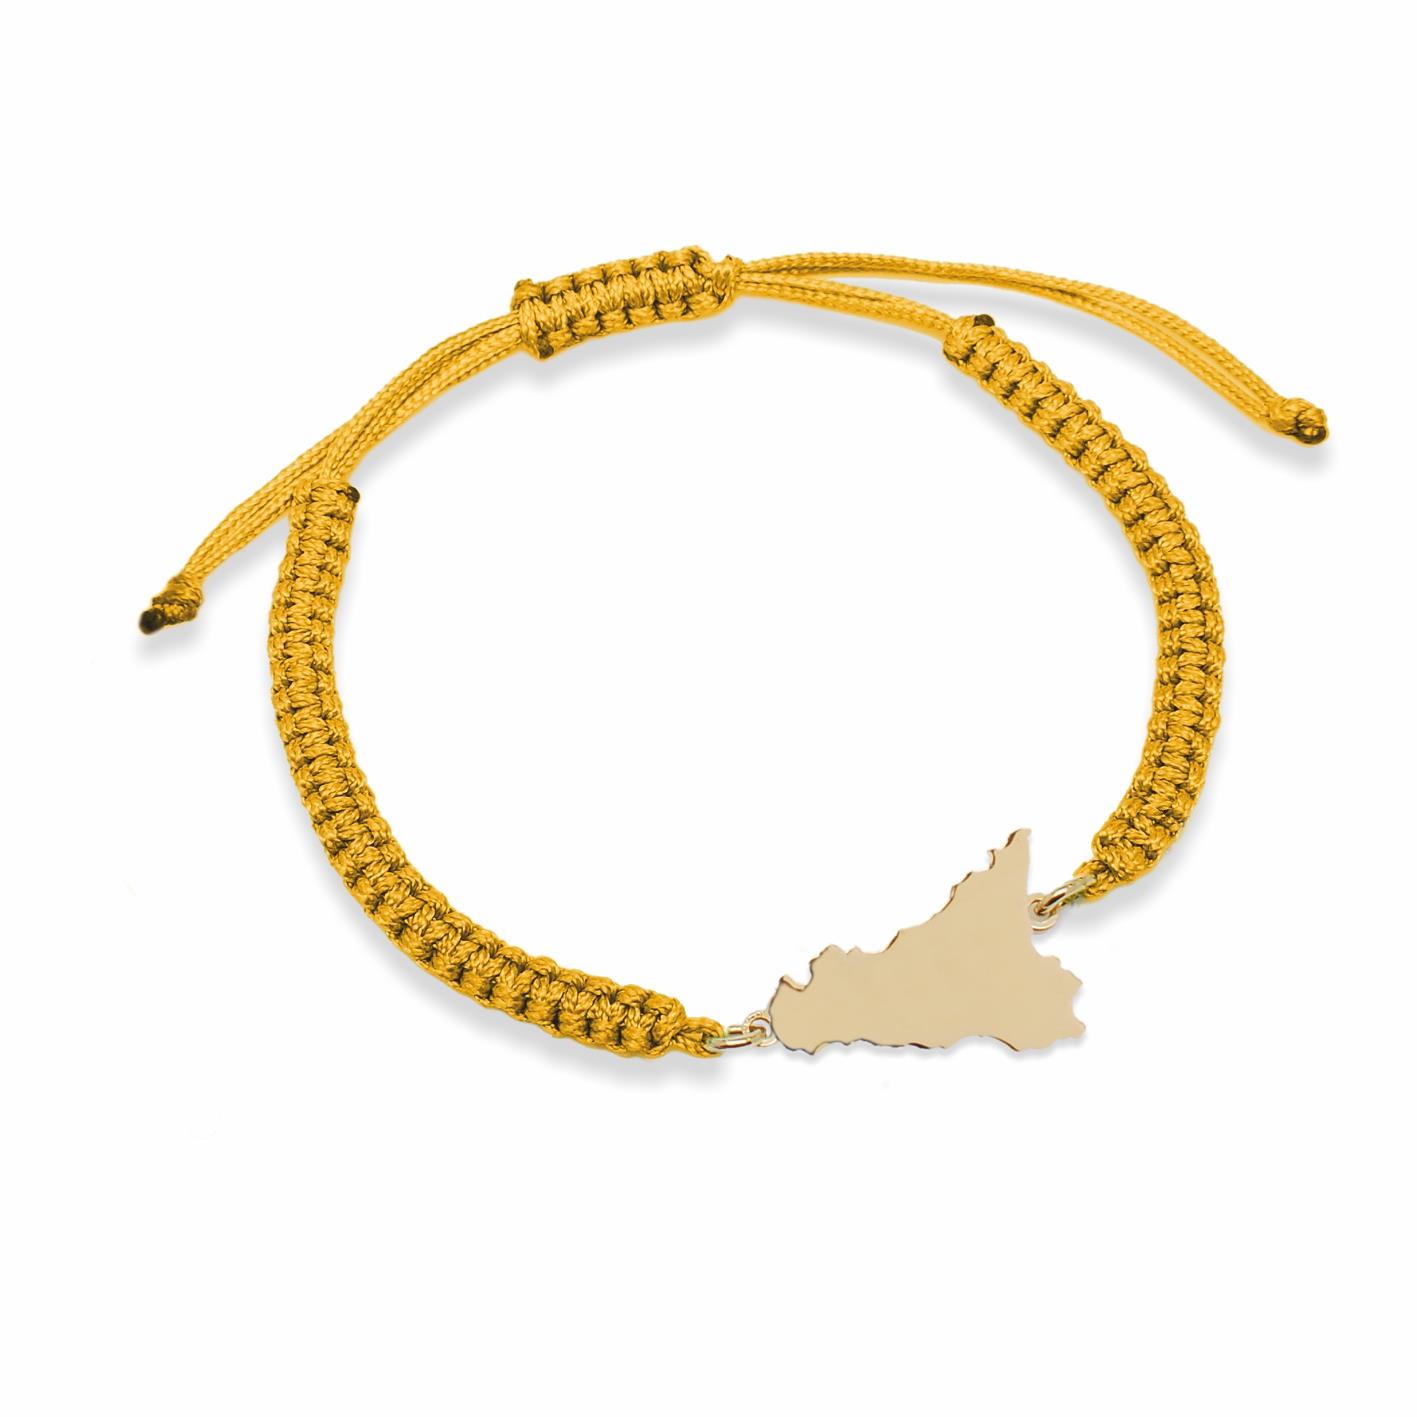 Mustard-colored nylon bracelet with Sicily symbol in gold-plated silver - MY SICILY